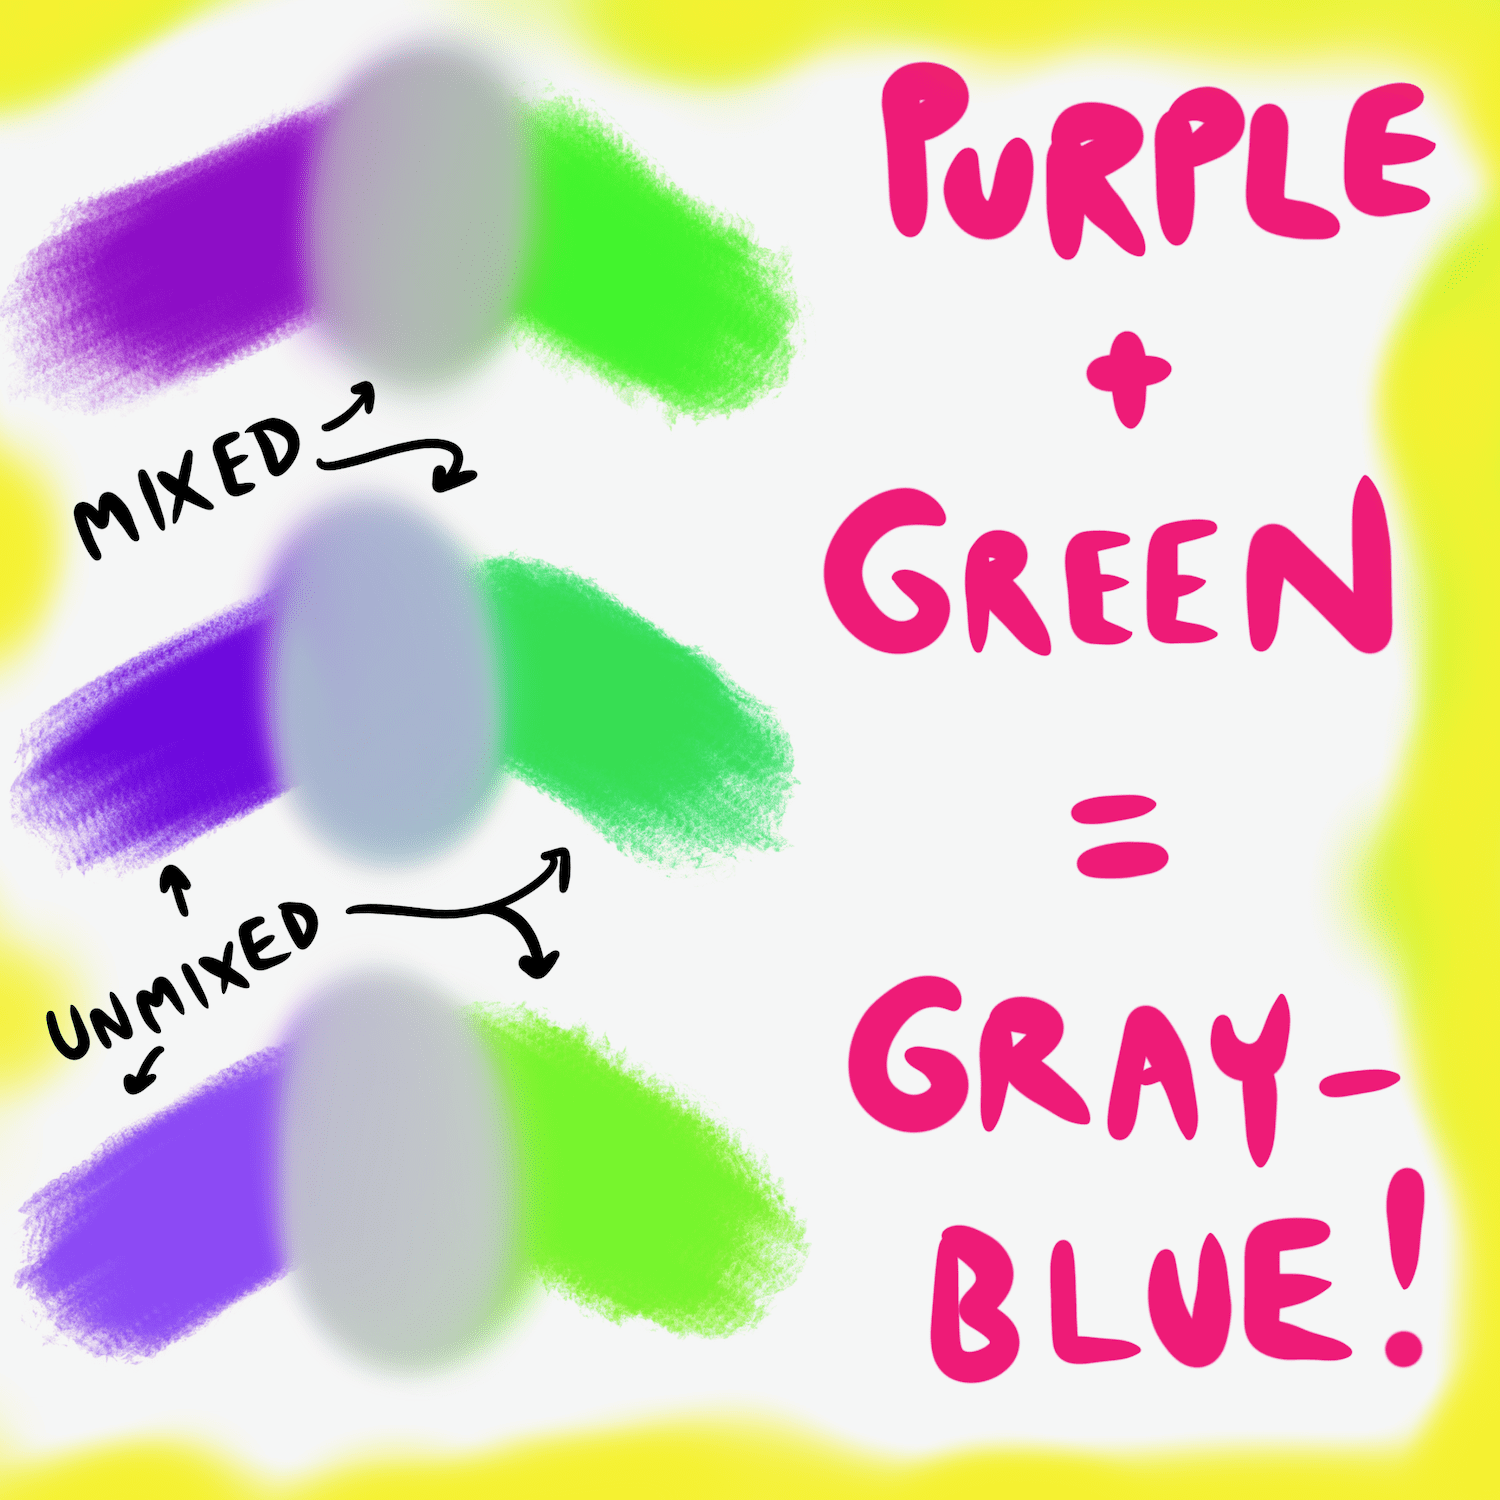 What does purple and green make?